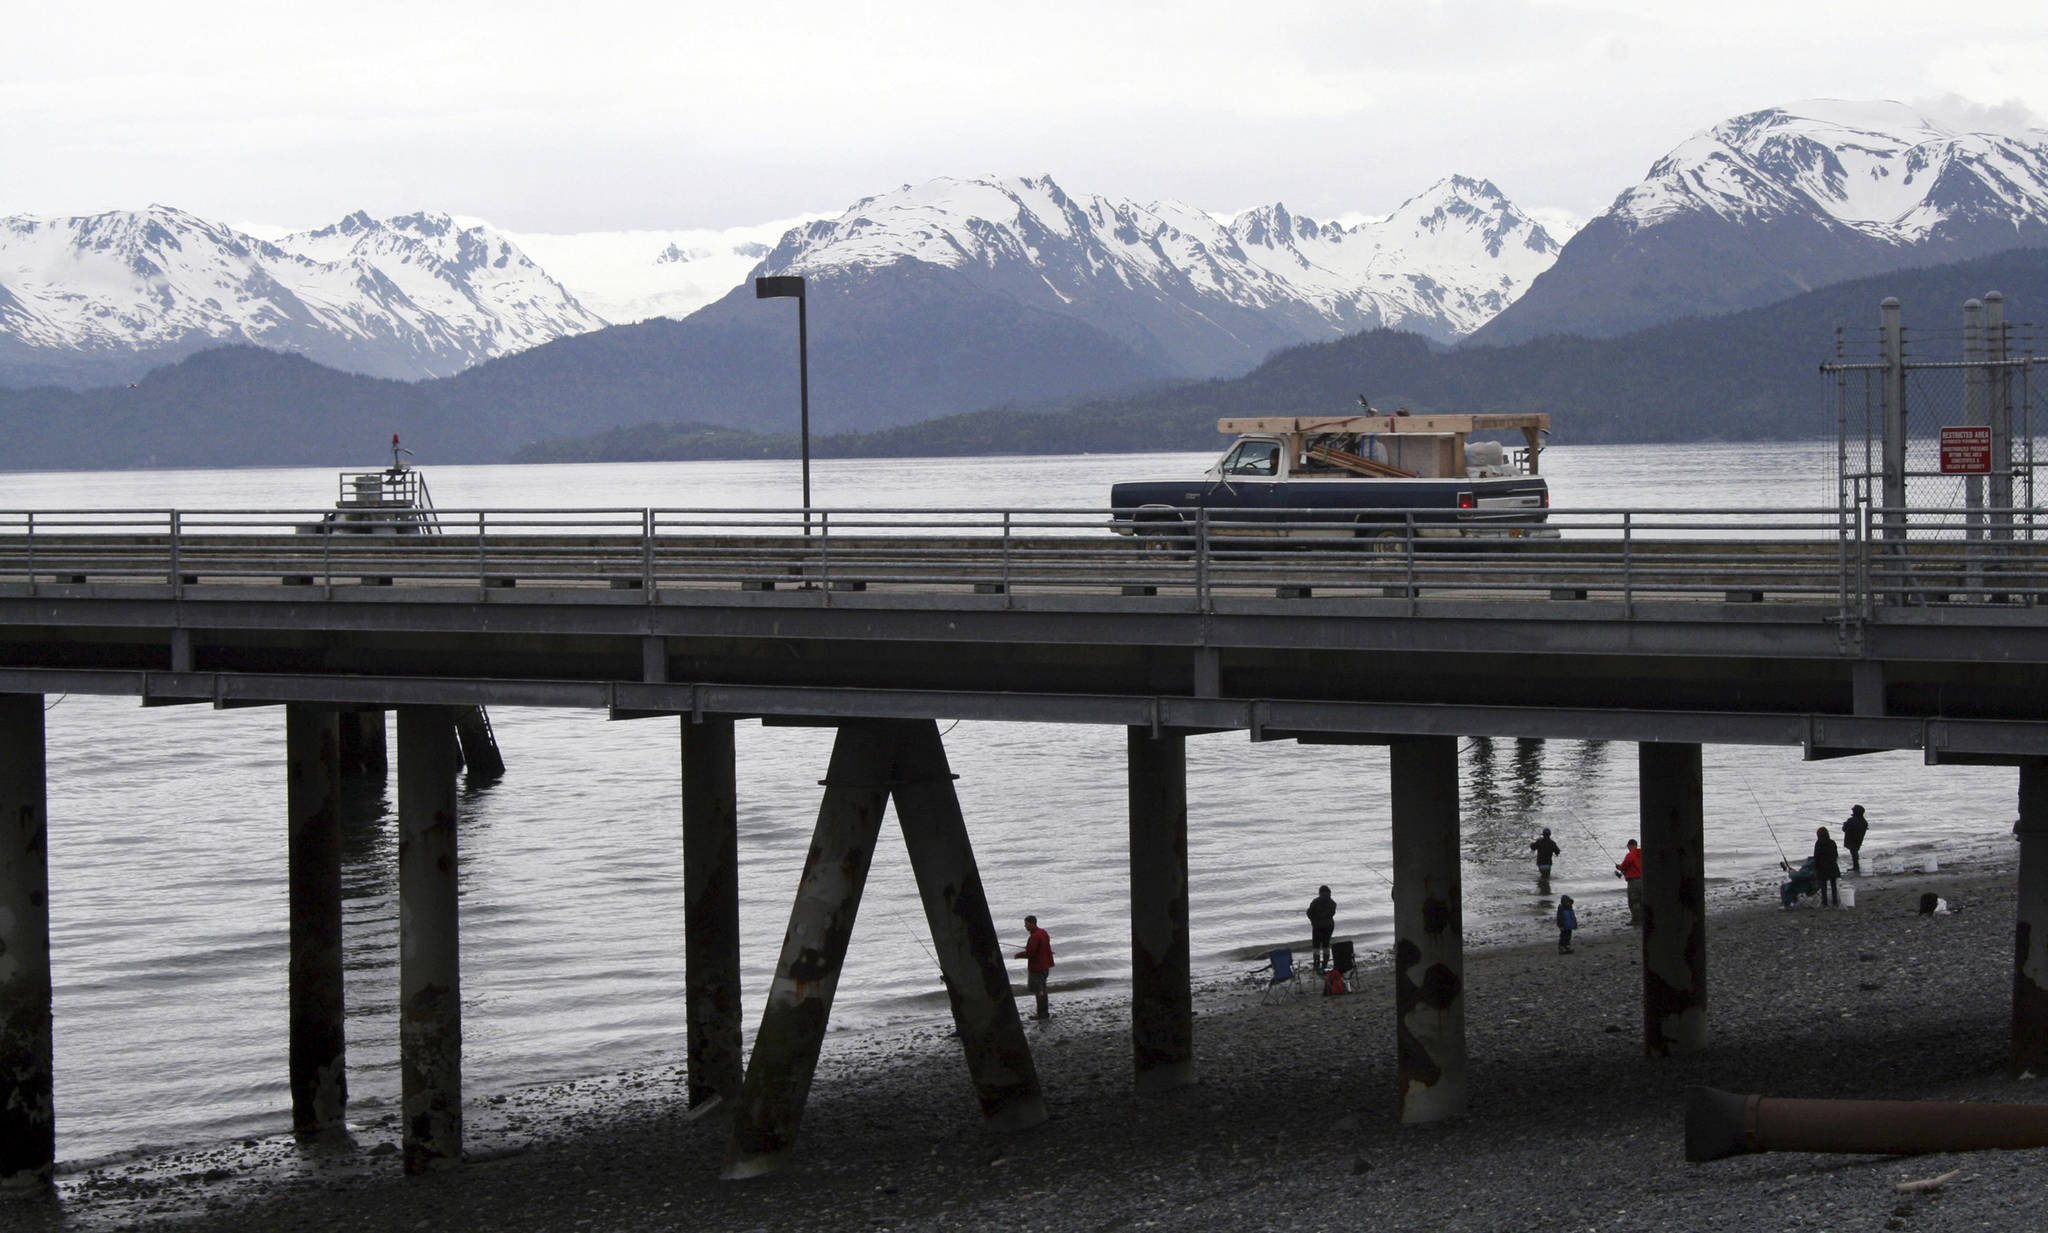 In this May 2015 photo, a vehicle drives on a pier to be loaded onto an Alaska state ferry while people fish underneath the pier in Homer, Alaska. The U.S. Supreme Court will hear oral arguments Monday, April 19, 2021, in a case that will determine who is eligible to receive more than $530 million in federal virus relief funding set aside for tribes more than a year ago. More than a dozen Native American tribes sued the U.S. Treasury Department to keep the money out of the hands of Alaska Native corporations, which provide services to Alaska Natives but do not have a government-to-government relationship with the United States. (AP Photo / Mark Thiessen)